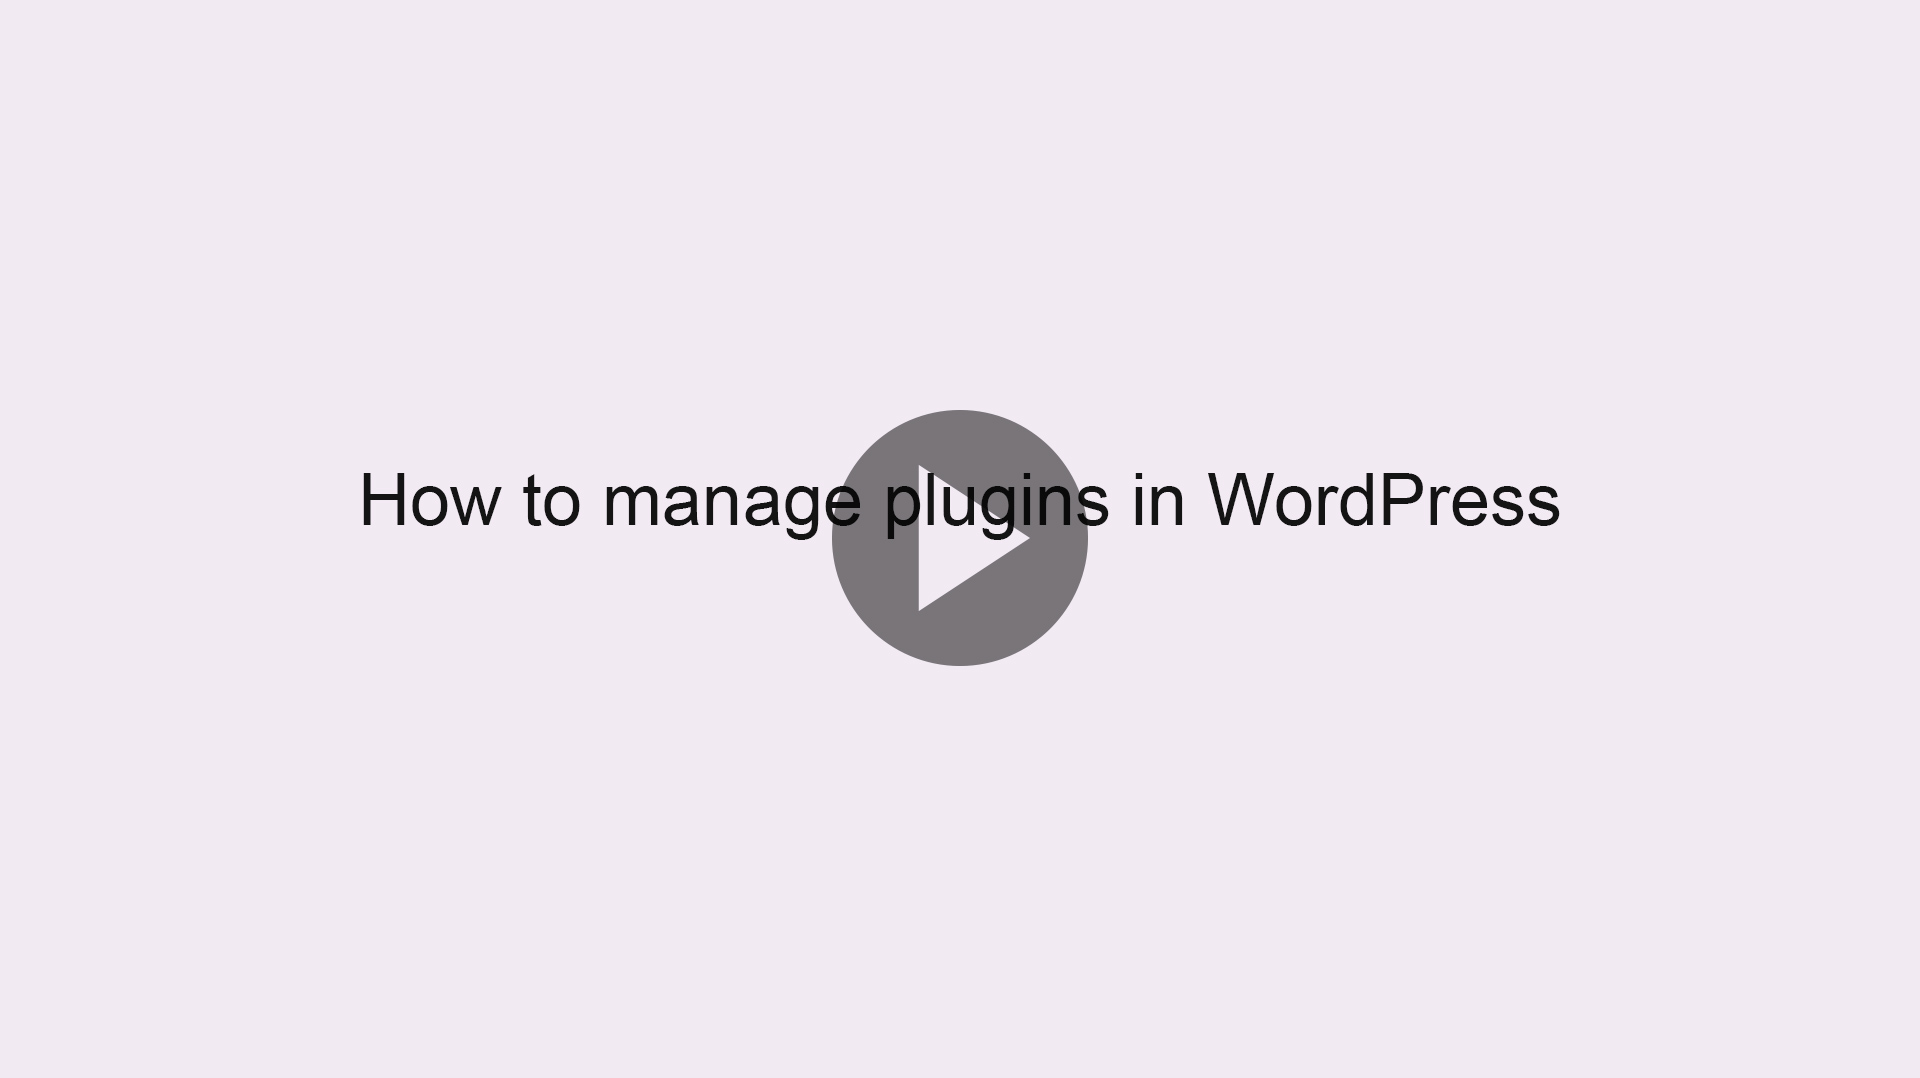 How to manage plugins in WordPress